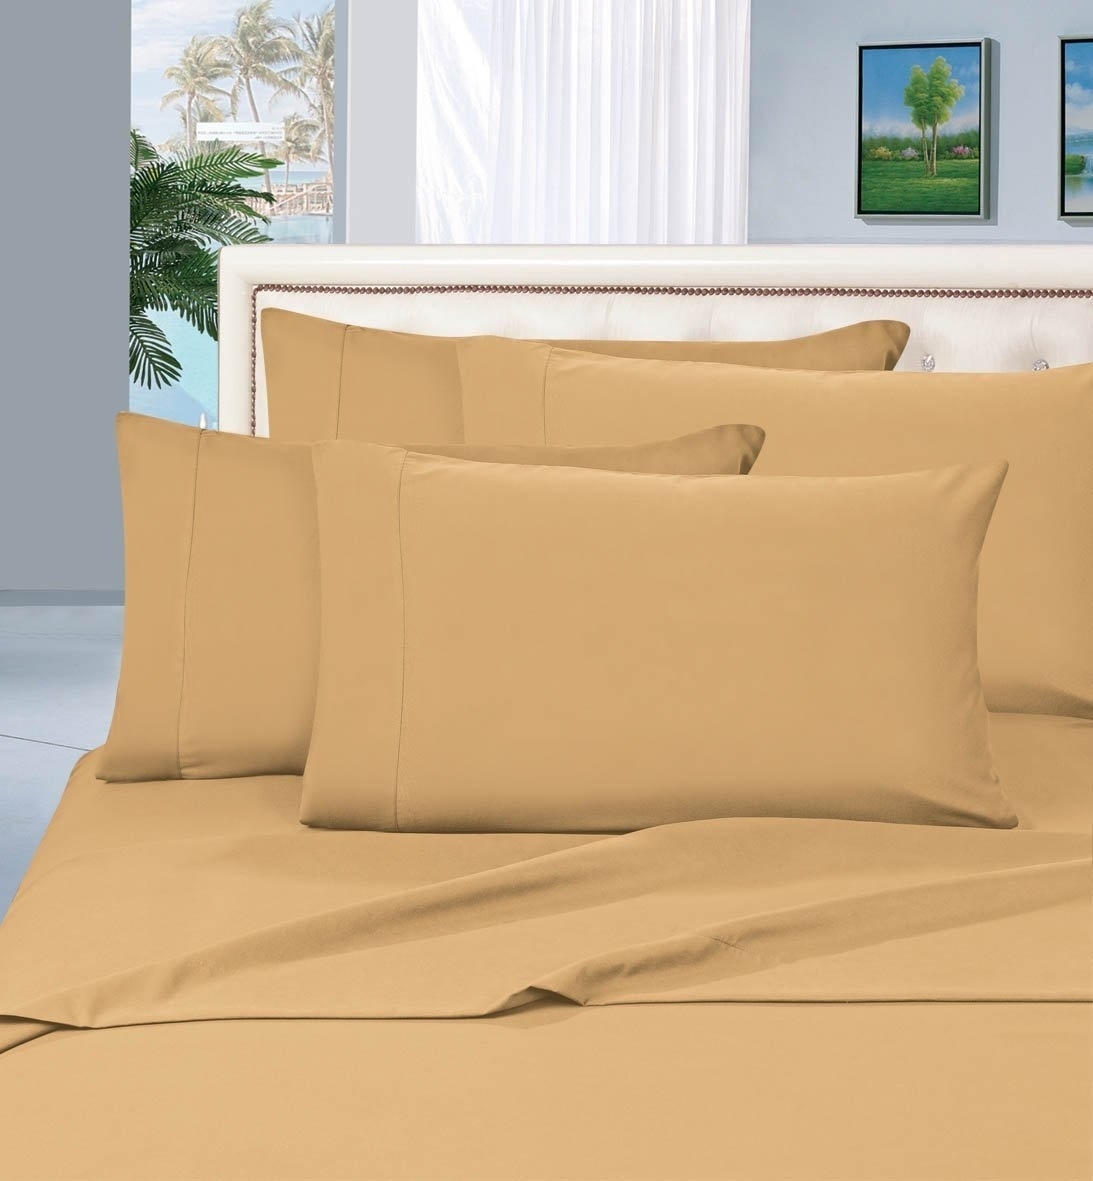 Elegant Comfort 1500 Series Wrinkle Resistant Egyptian Quality Hypoallergenic Ultra Soft Luxury 3-piece Bed Sheet Set, Twin, Camel-gold